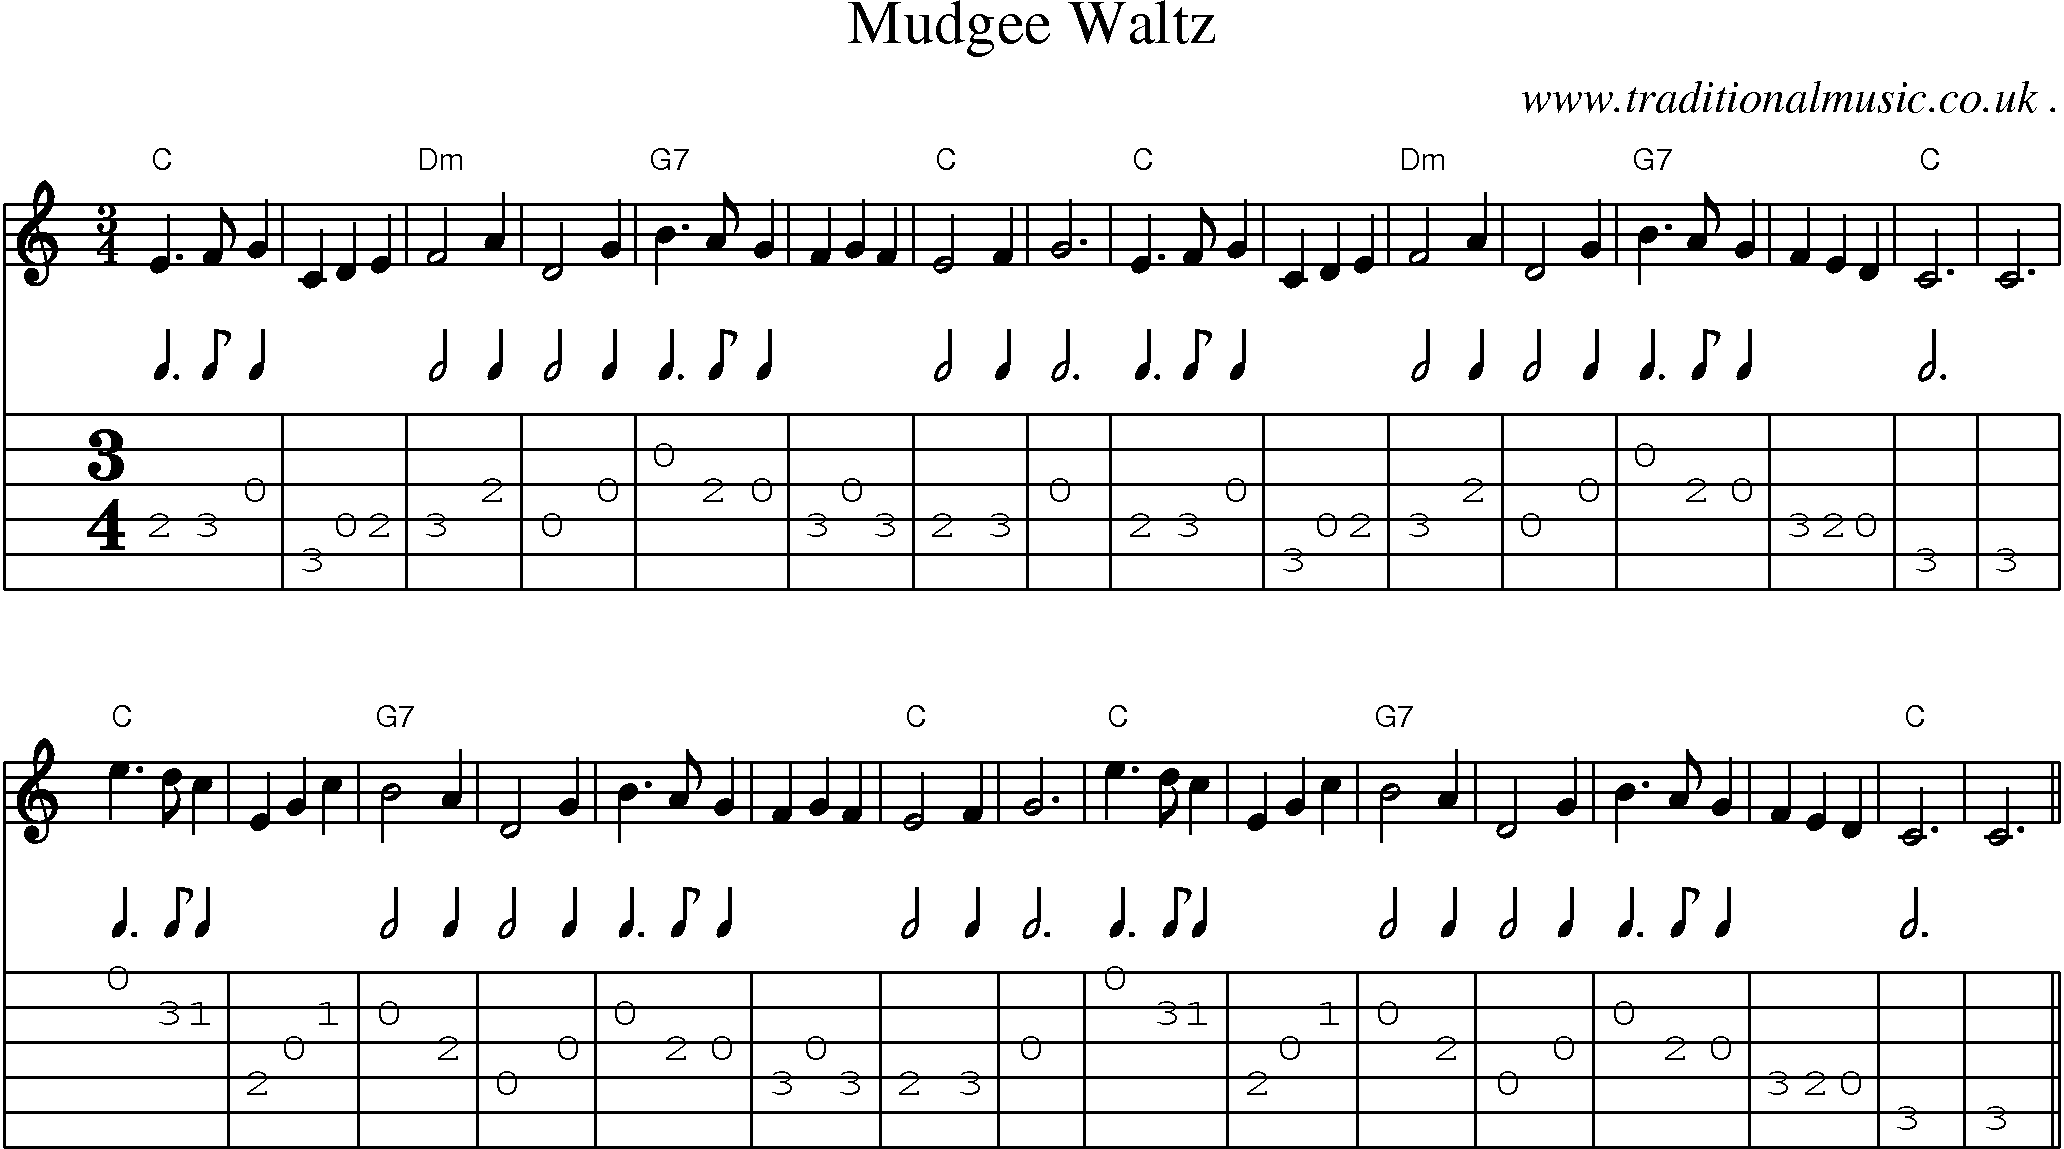 Music Score and Guitar Tabs for Mudgee Waltz